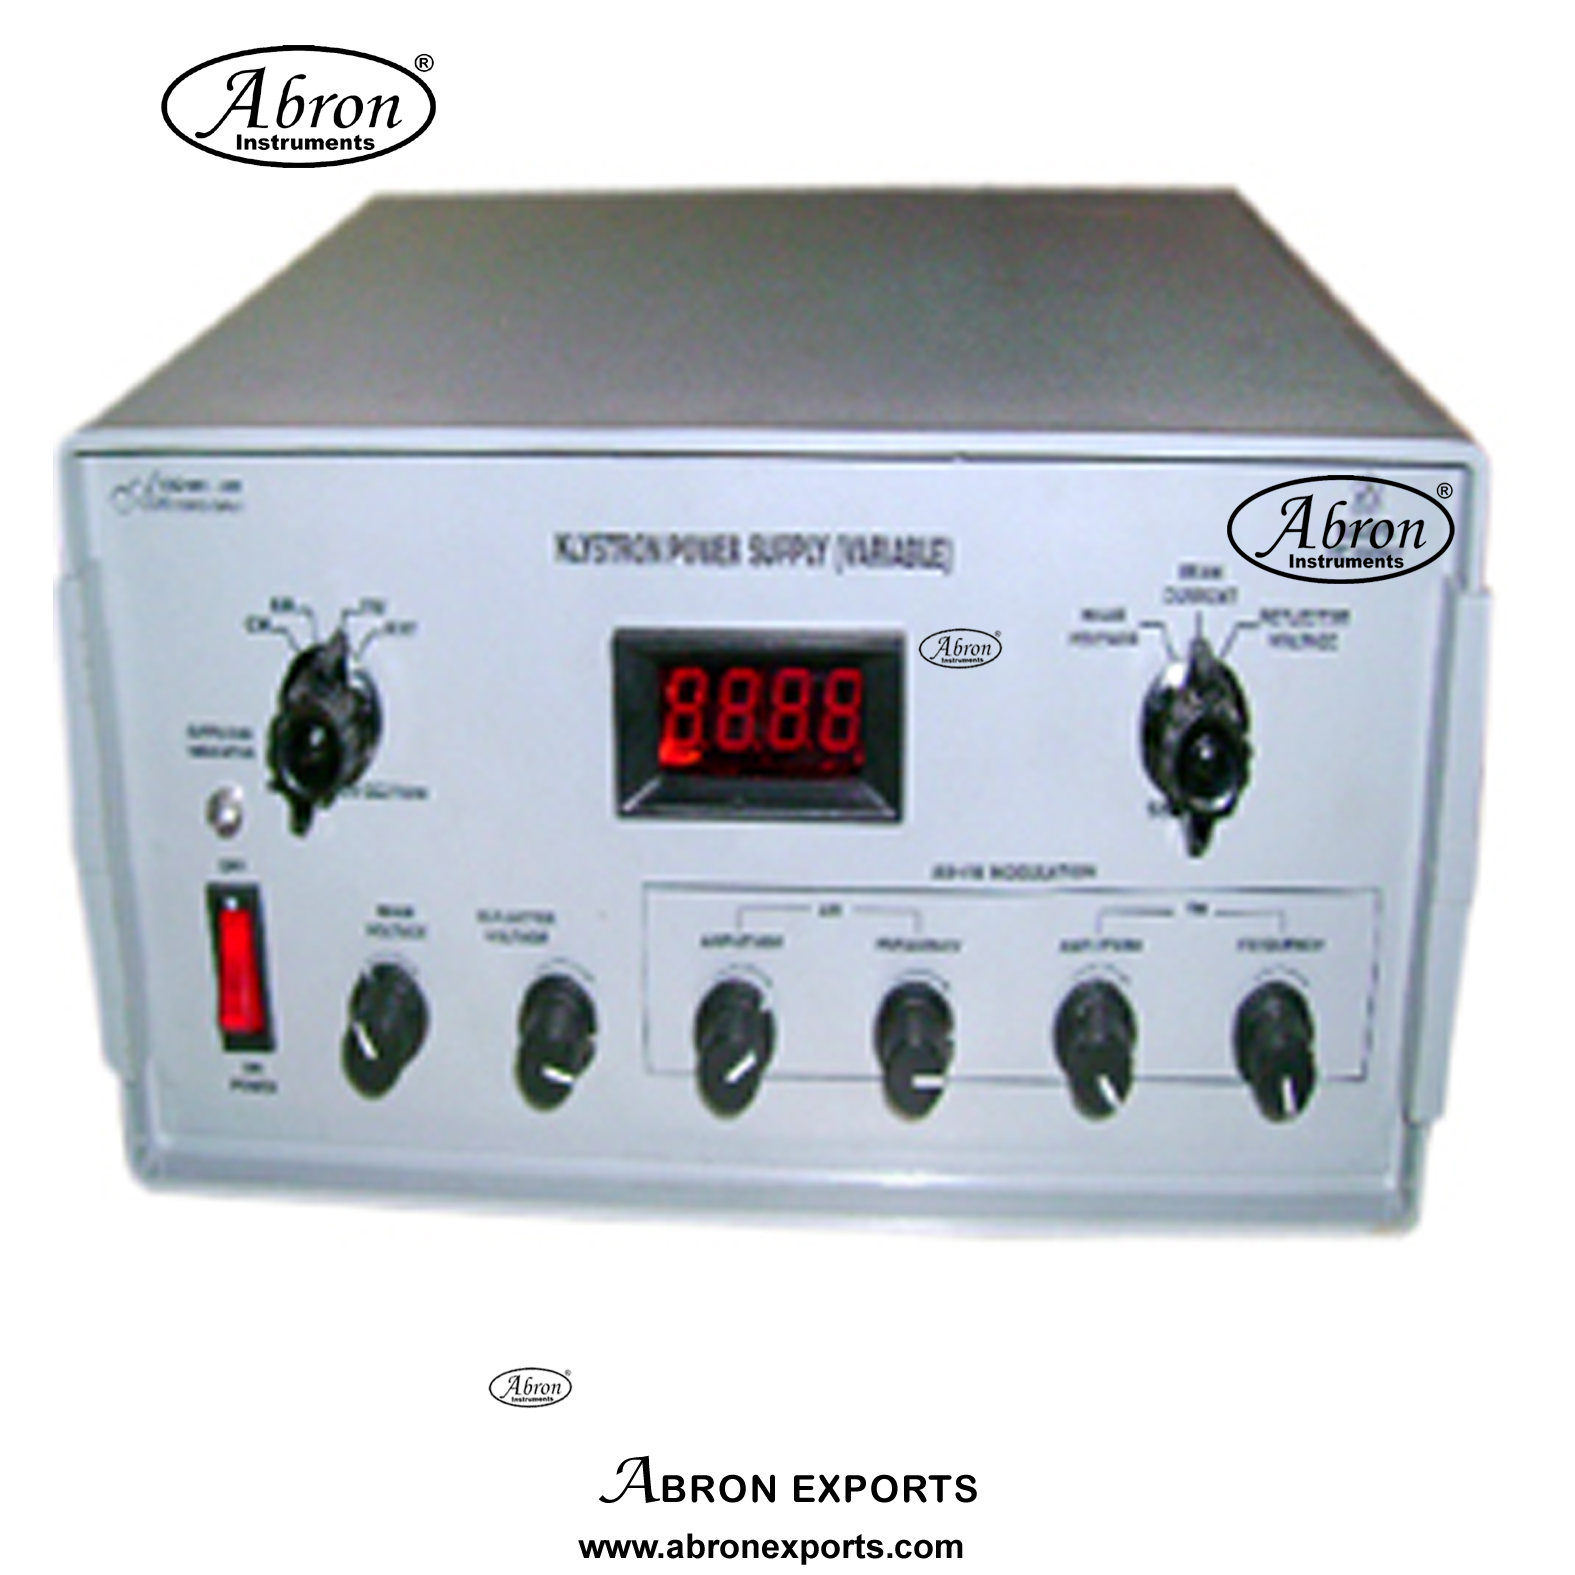 Microwave test bench setup spare Klystron Power Supply Square &Saw Wave digital Abron AE-1305GP